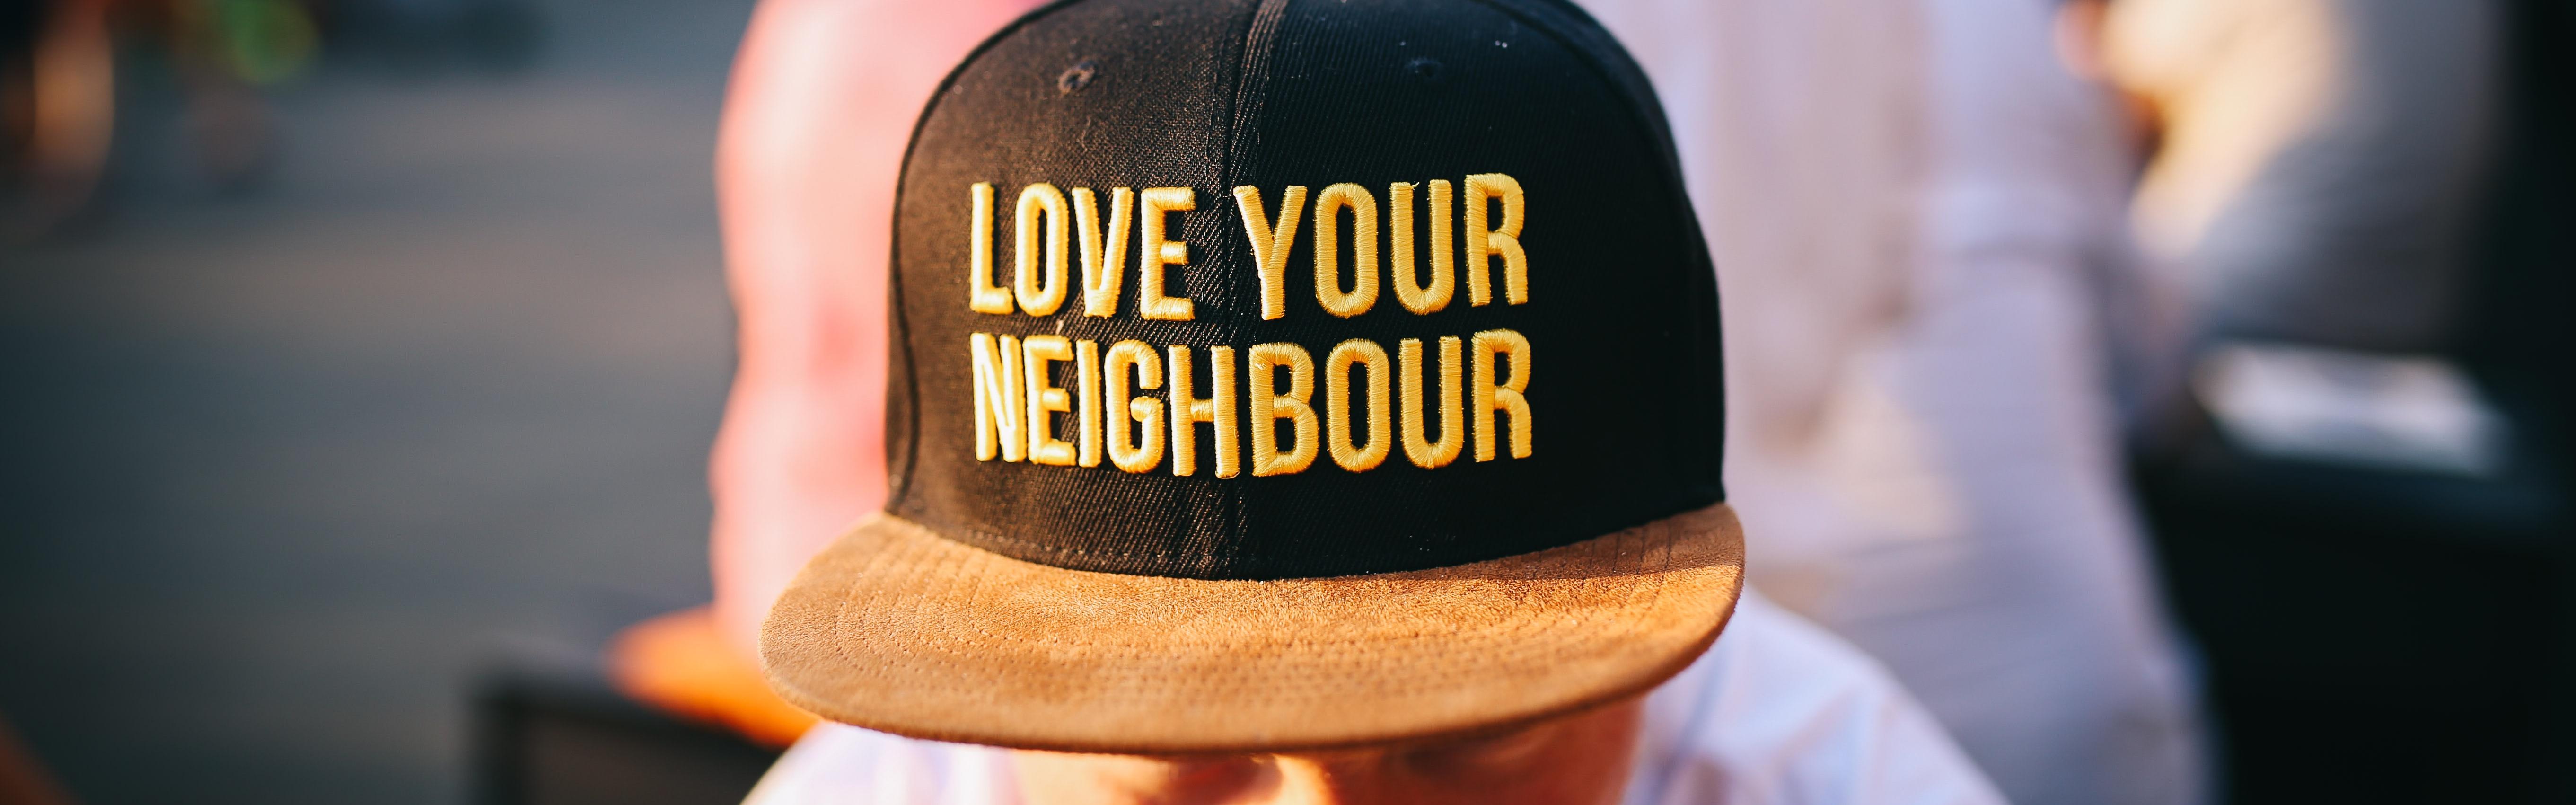 Man sat looking downwards with cap with words 'Love thy Neighbor'